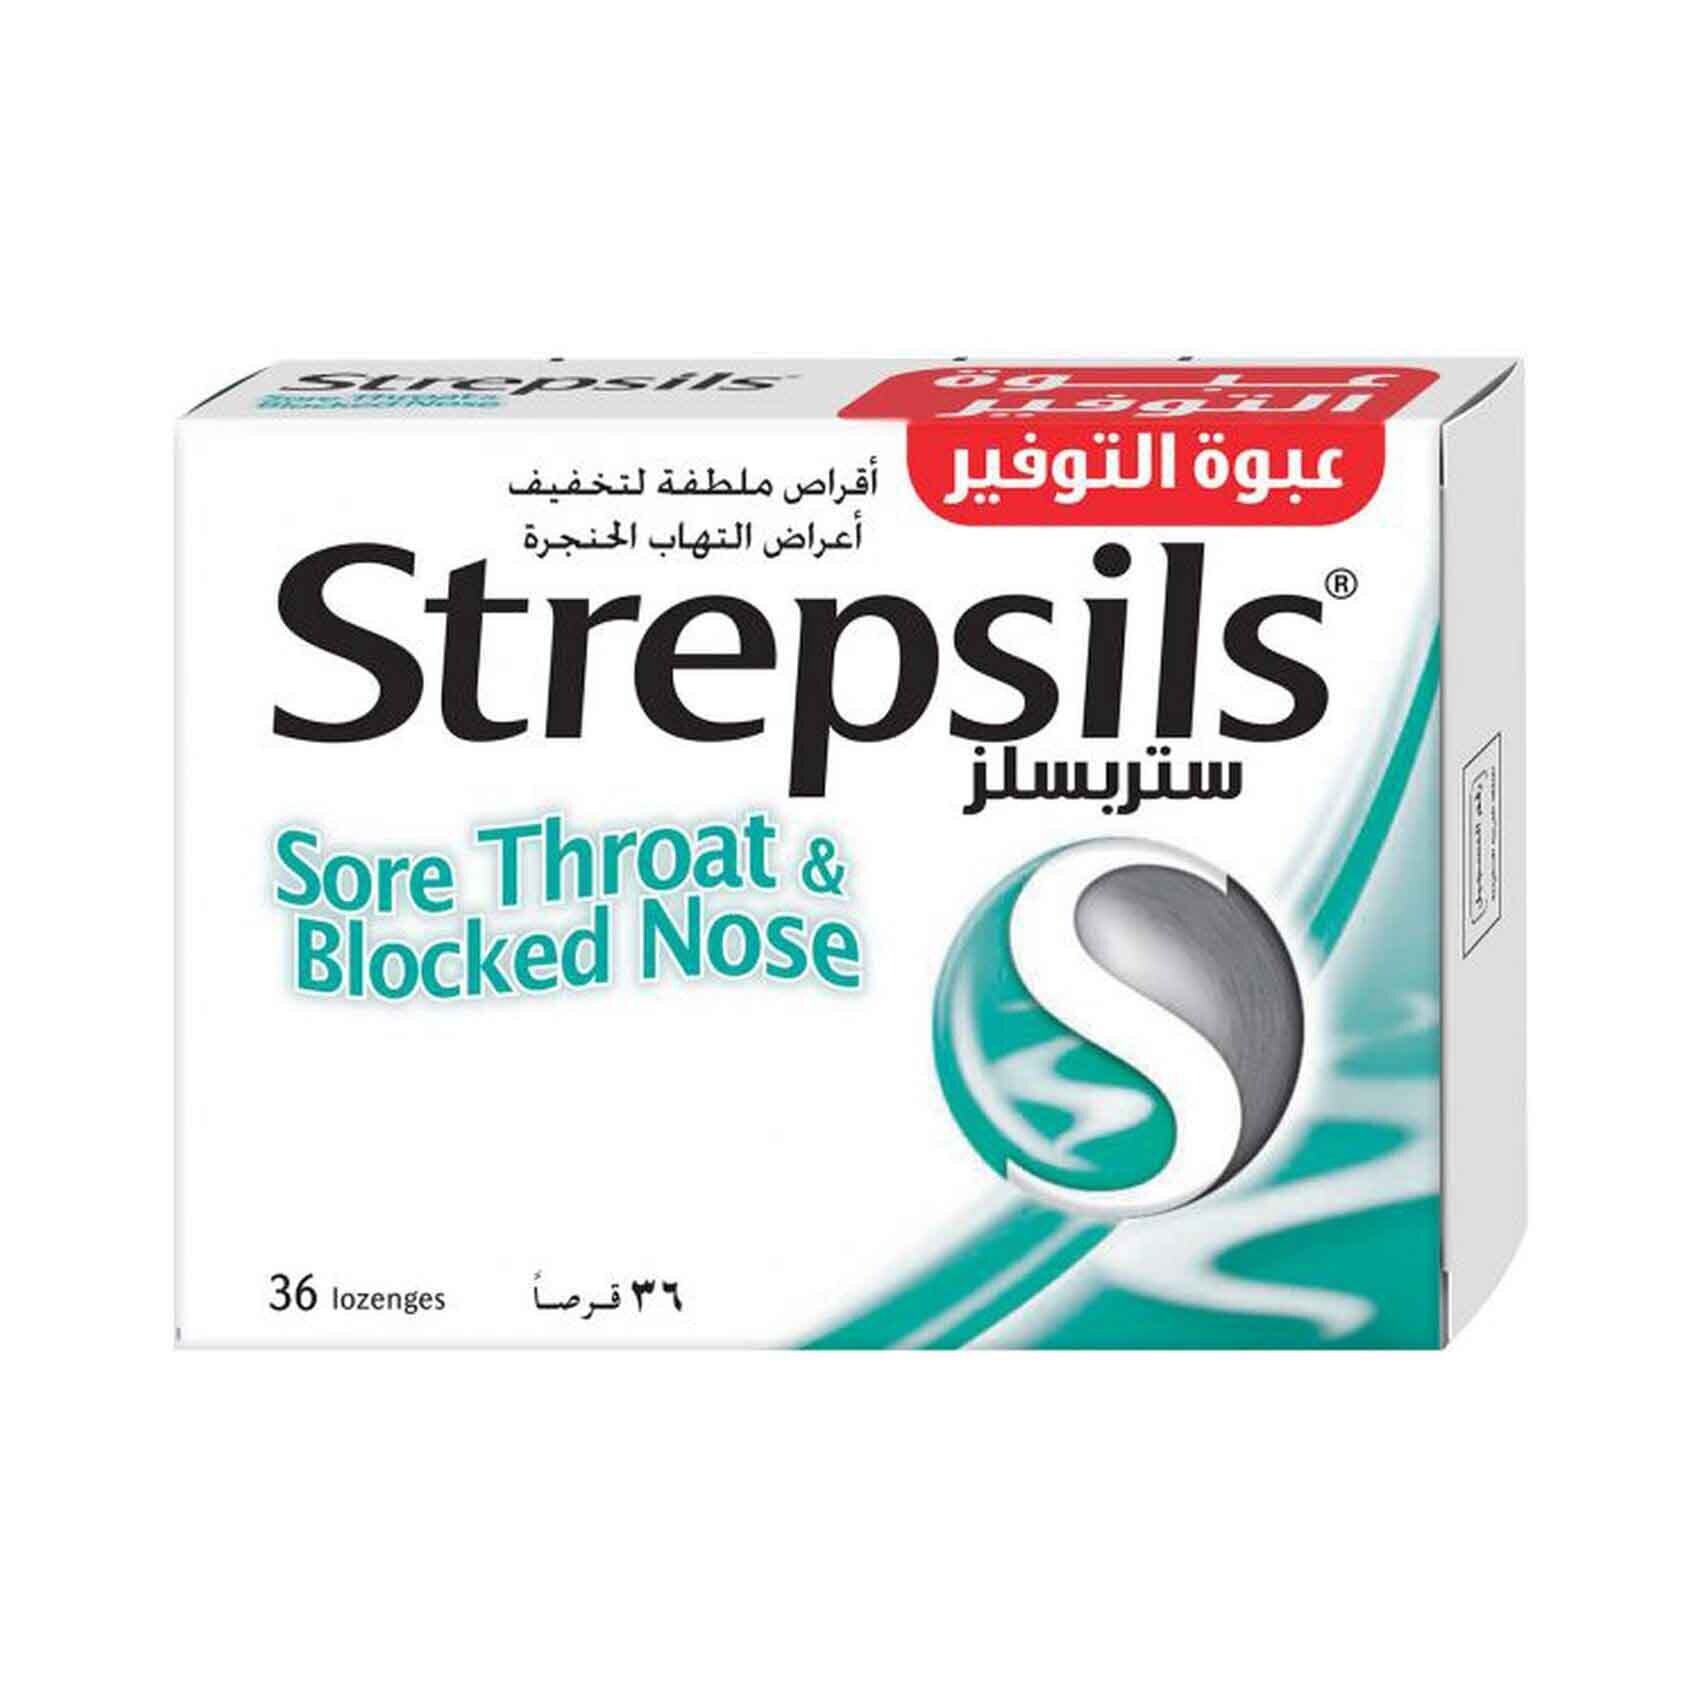 Buy Strepsils Sore Throat And Blocked Nose Relief Menthol Lozenges 36 Count Online Shop Health Fitness On Carrefour Uae